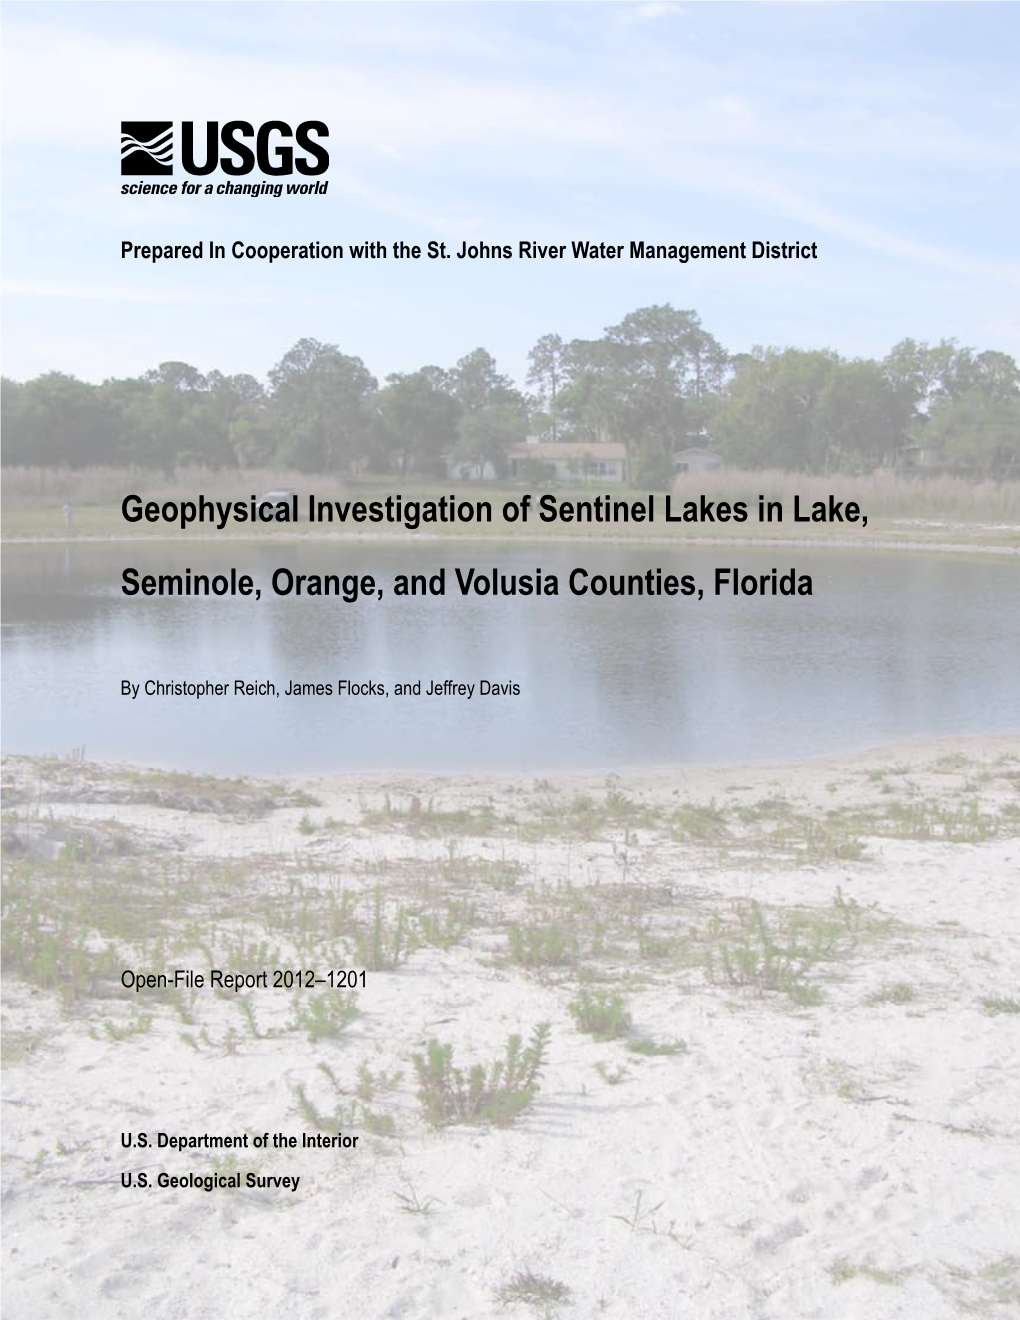 Geophysical Investigation of Sentinel Lakes in Lake, Seminole, Orange, and Volusia Counties, Florida